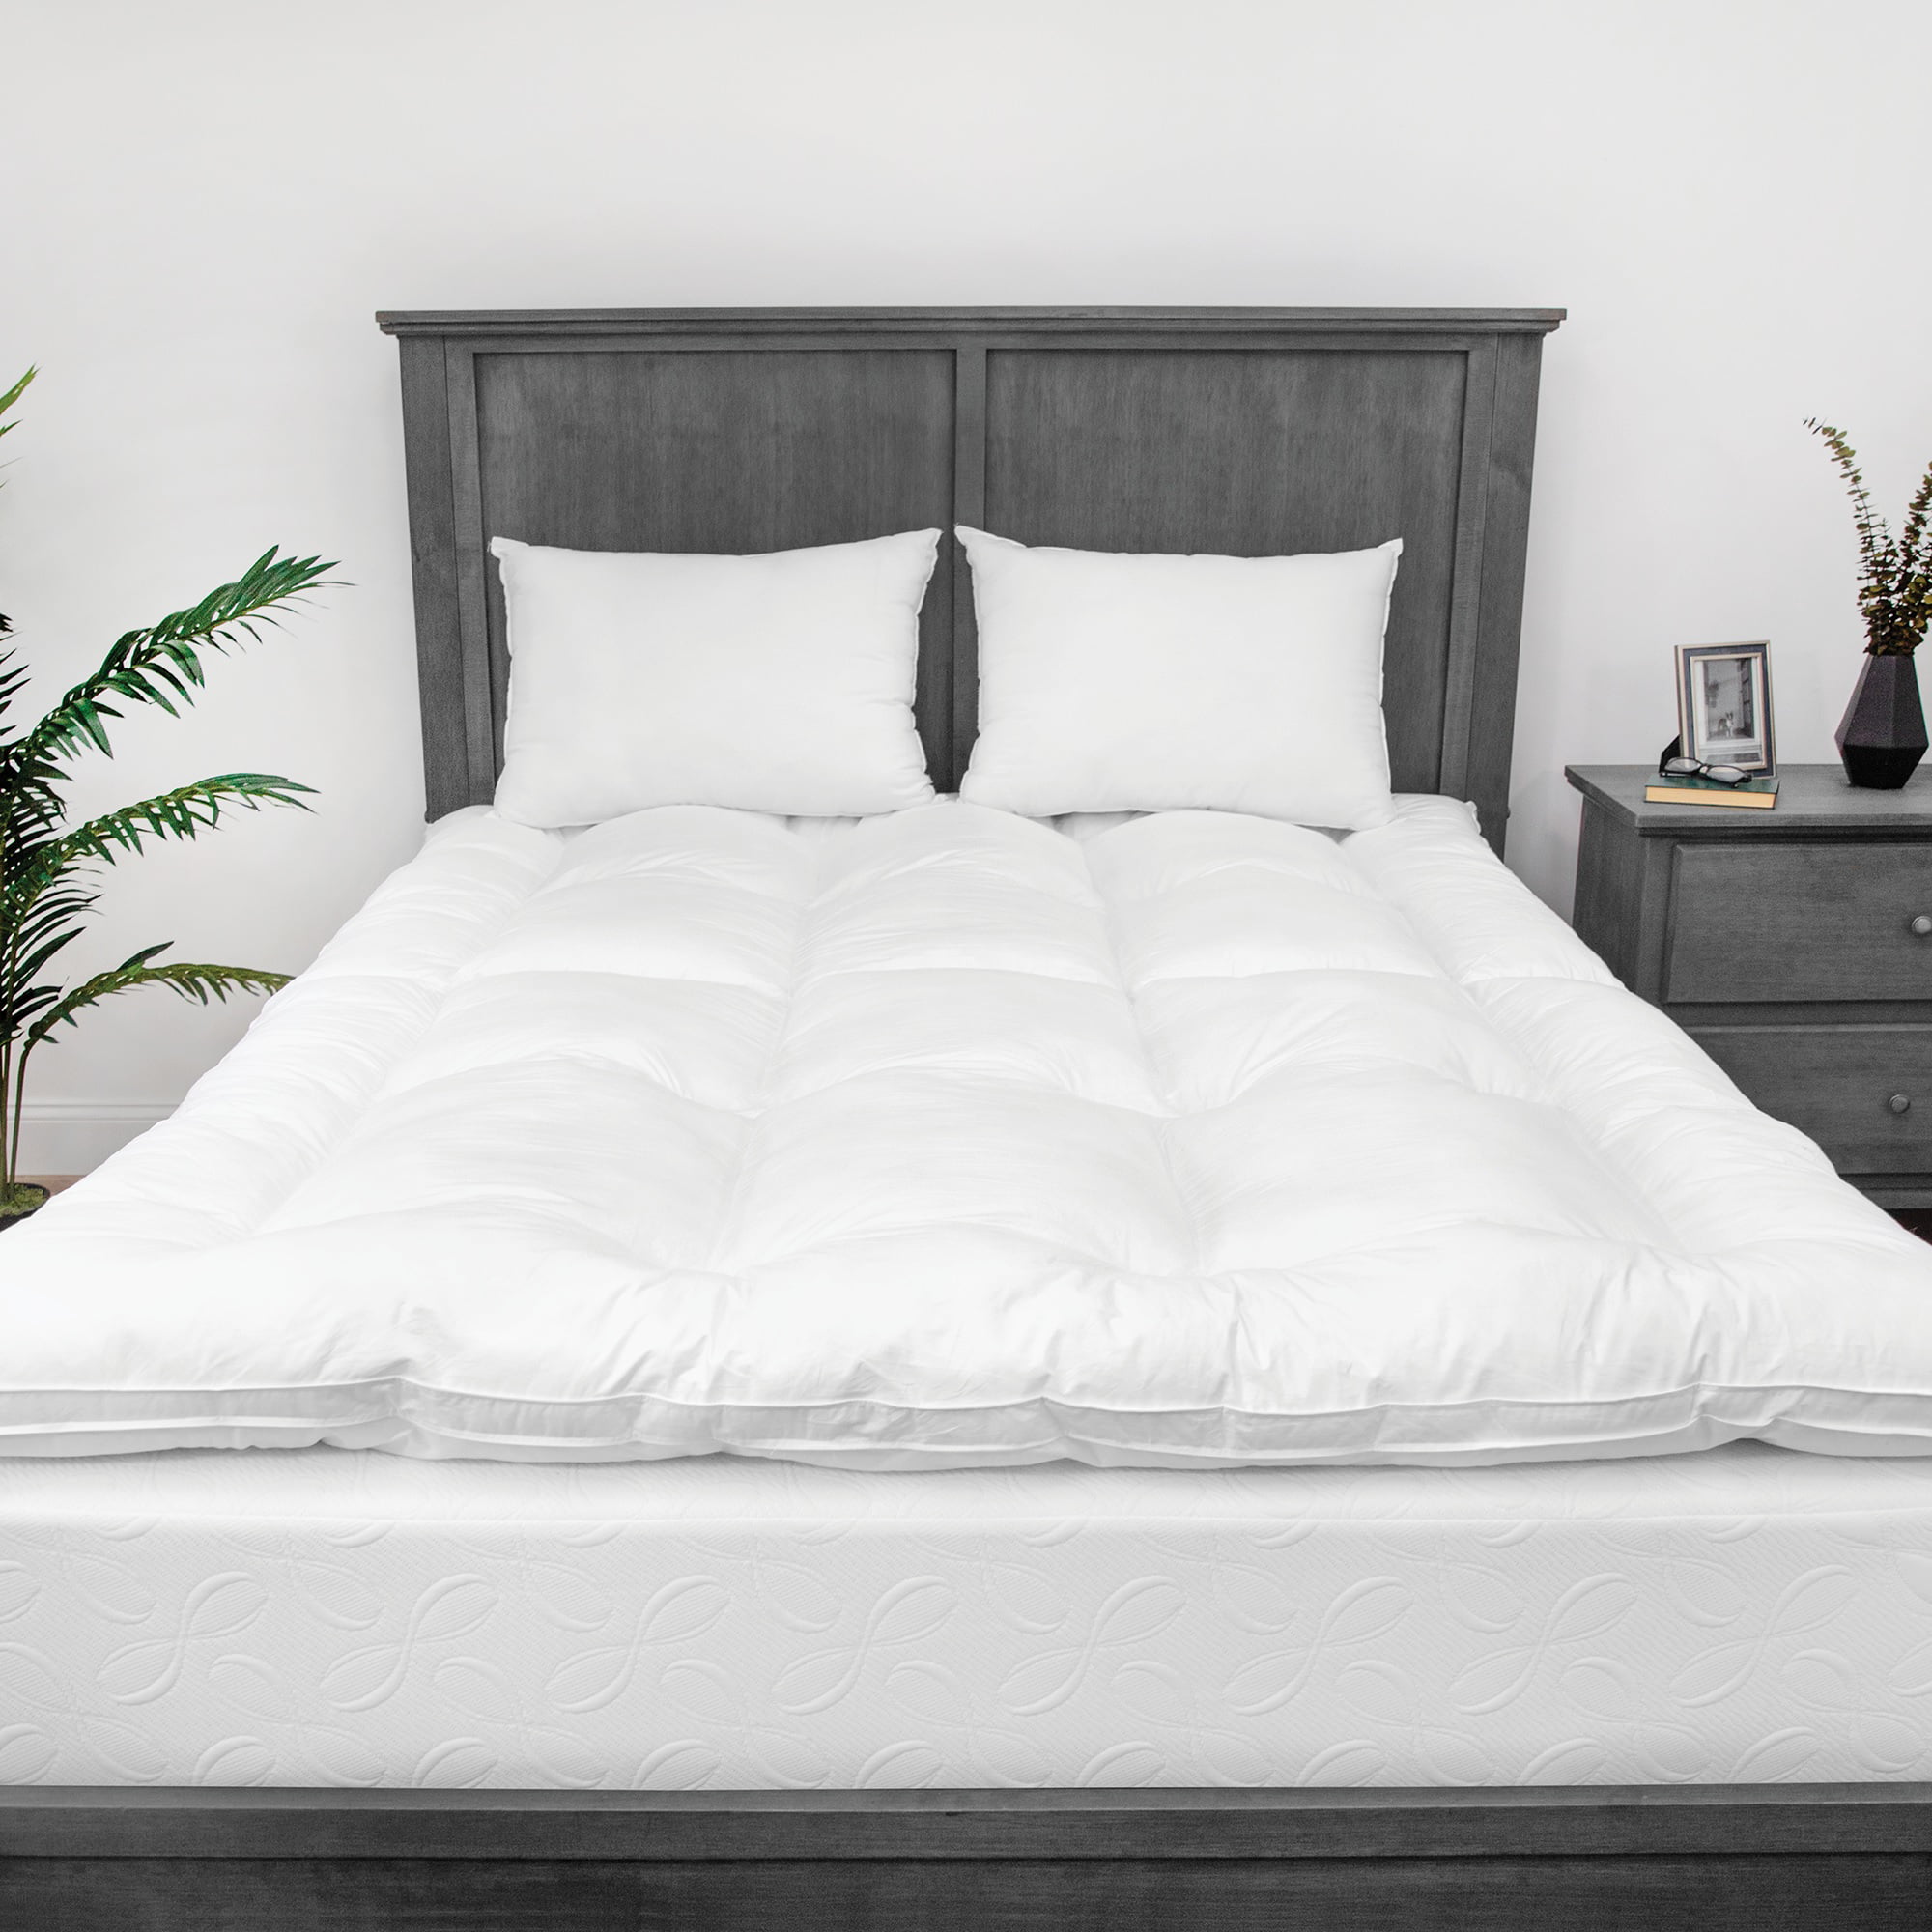 Enhance Comfort And Convenience: The Best Mattress Toppers for Guest Rooms and Sofa Beds